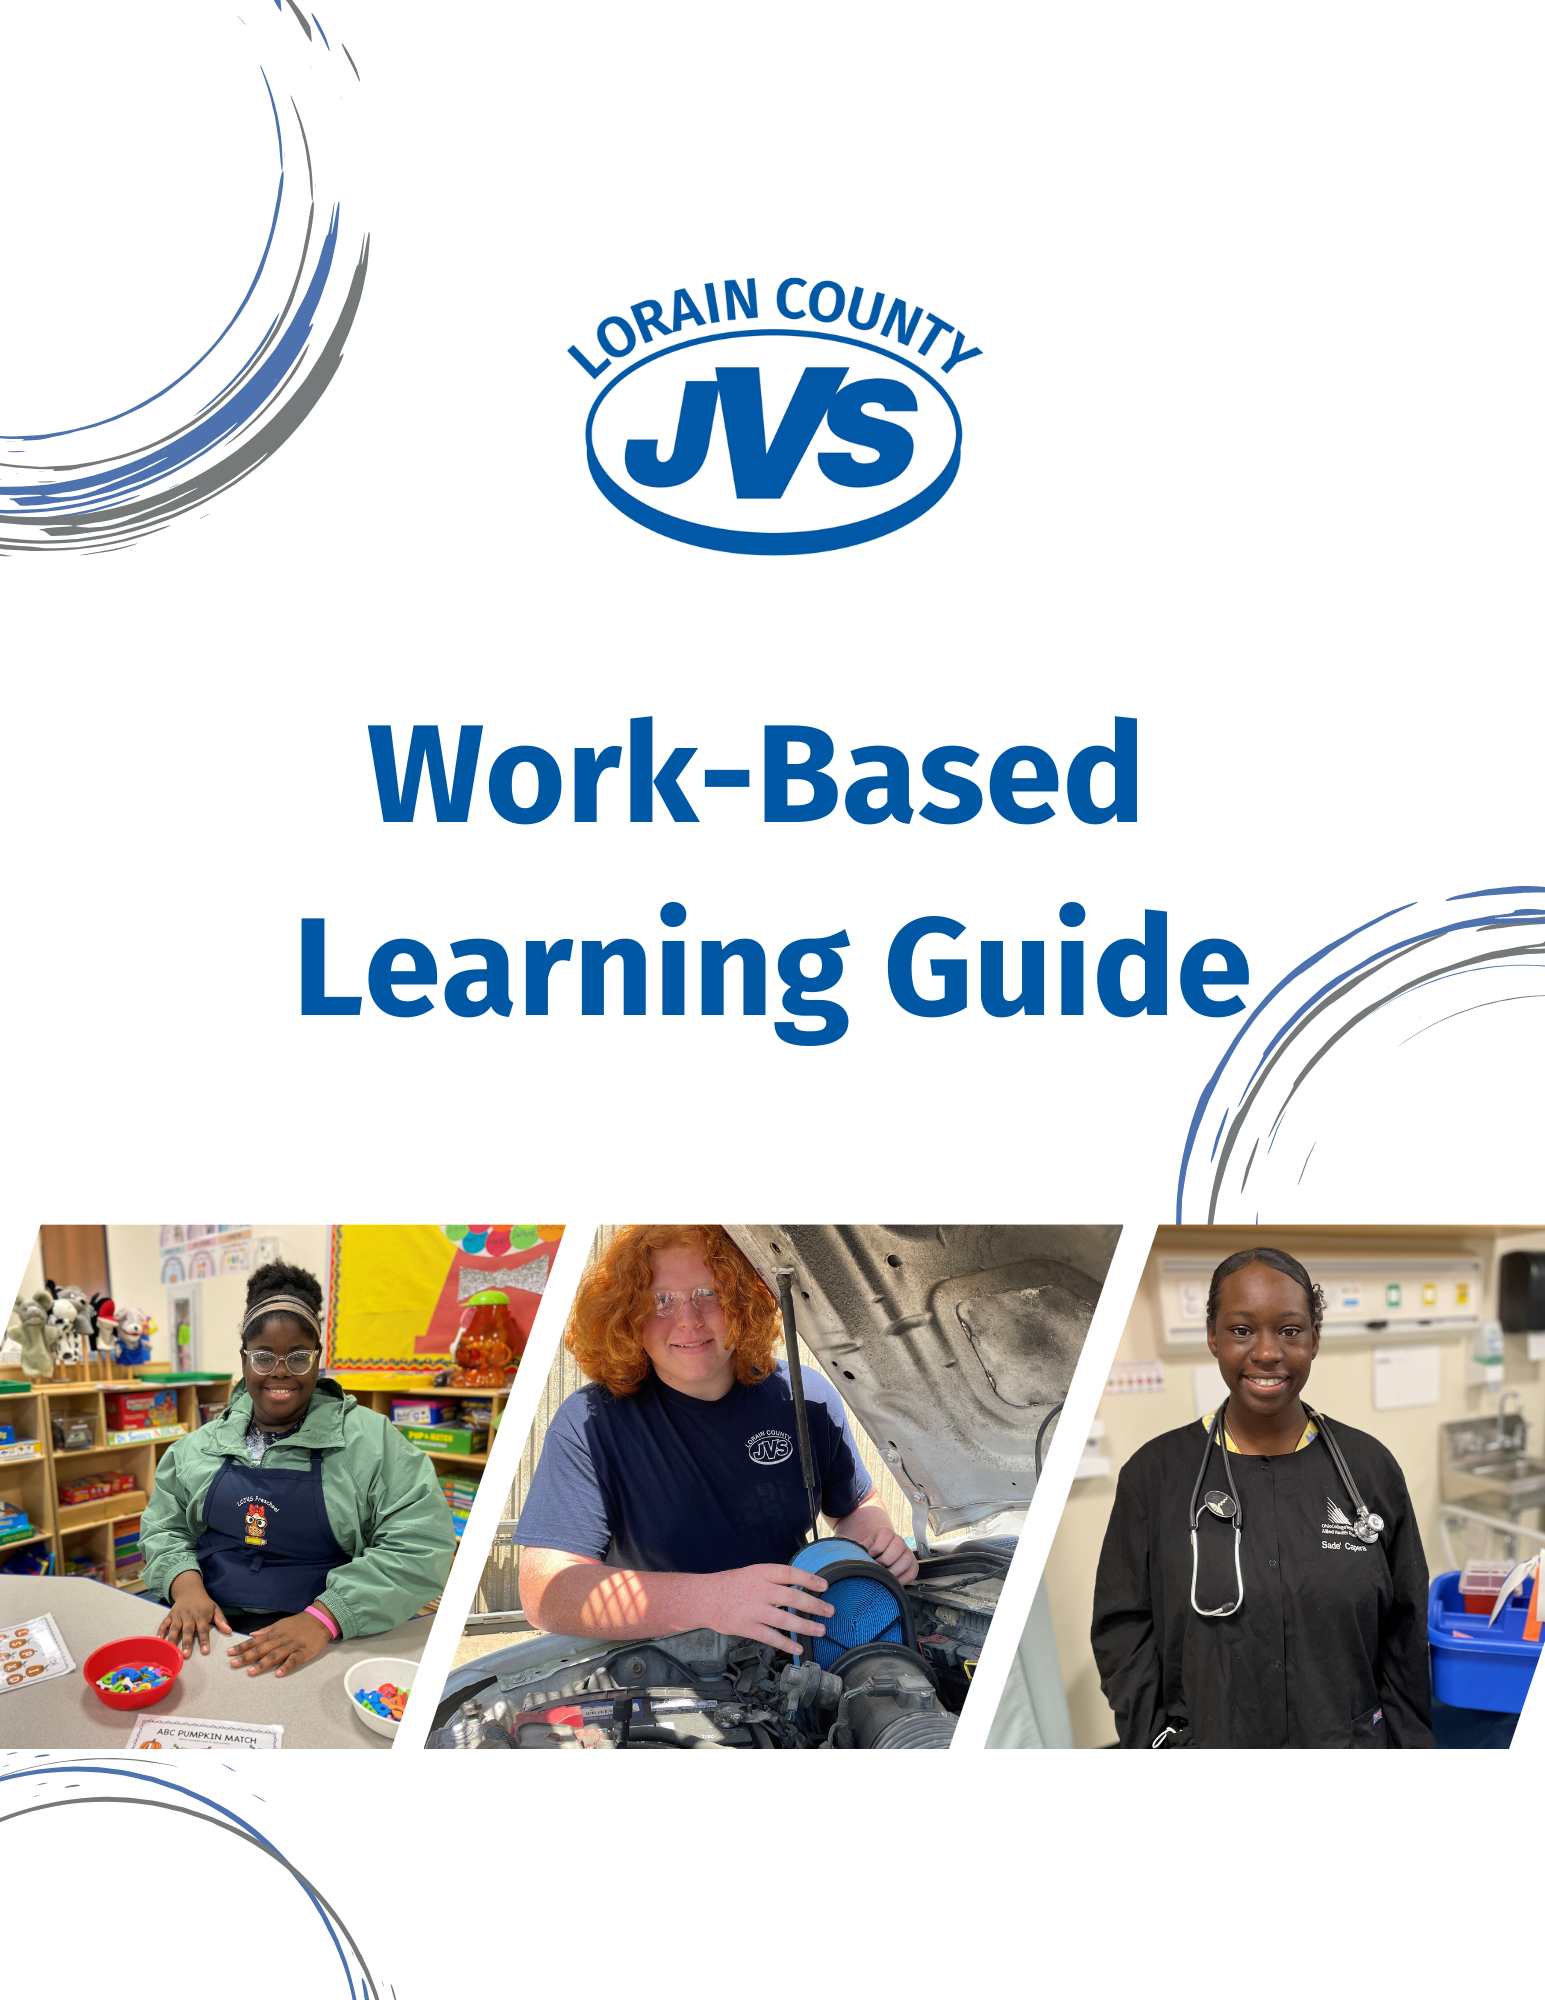 work-based learning guide with three photos of students working in a career tech field